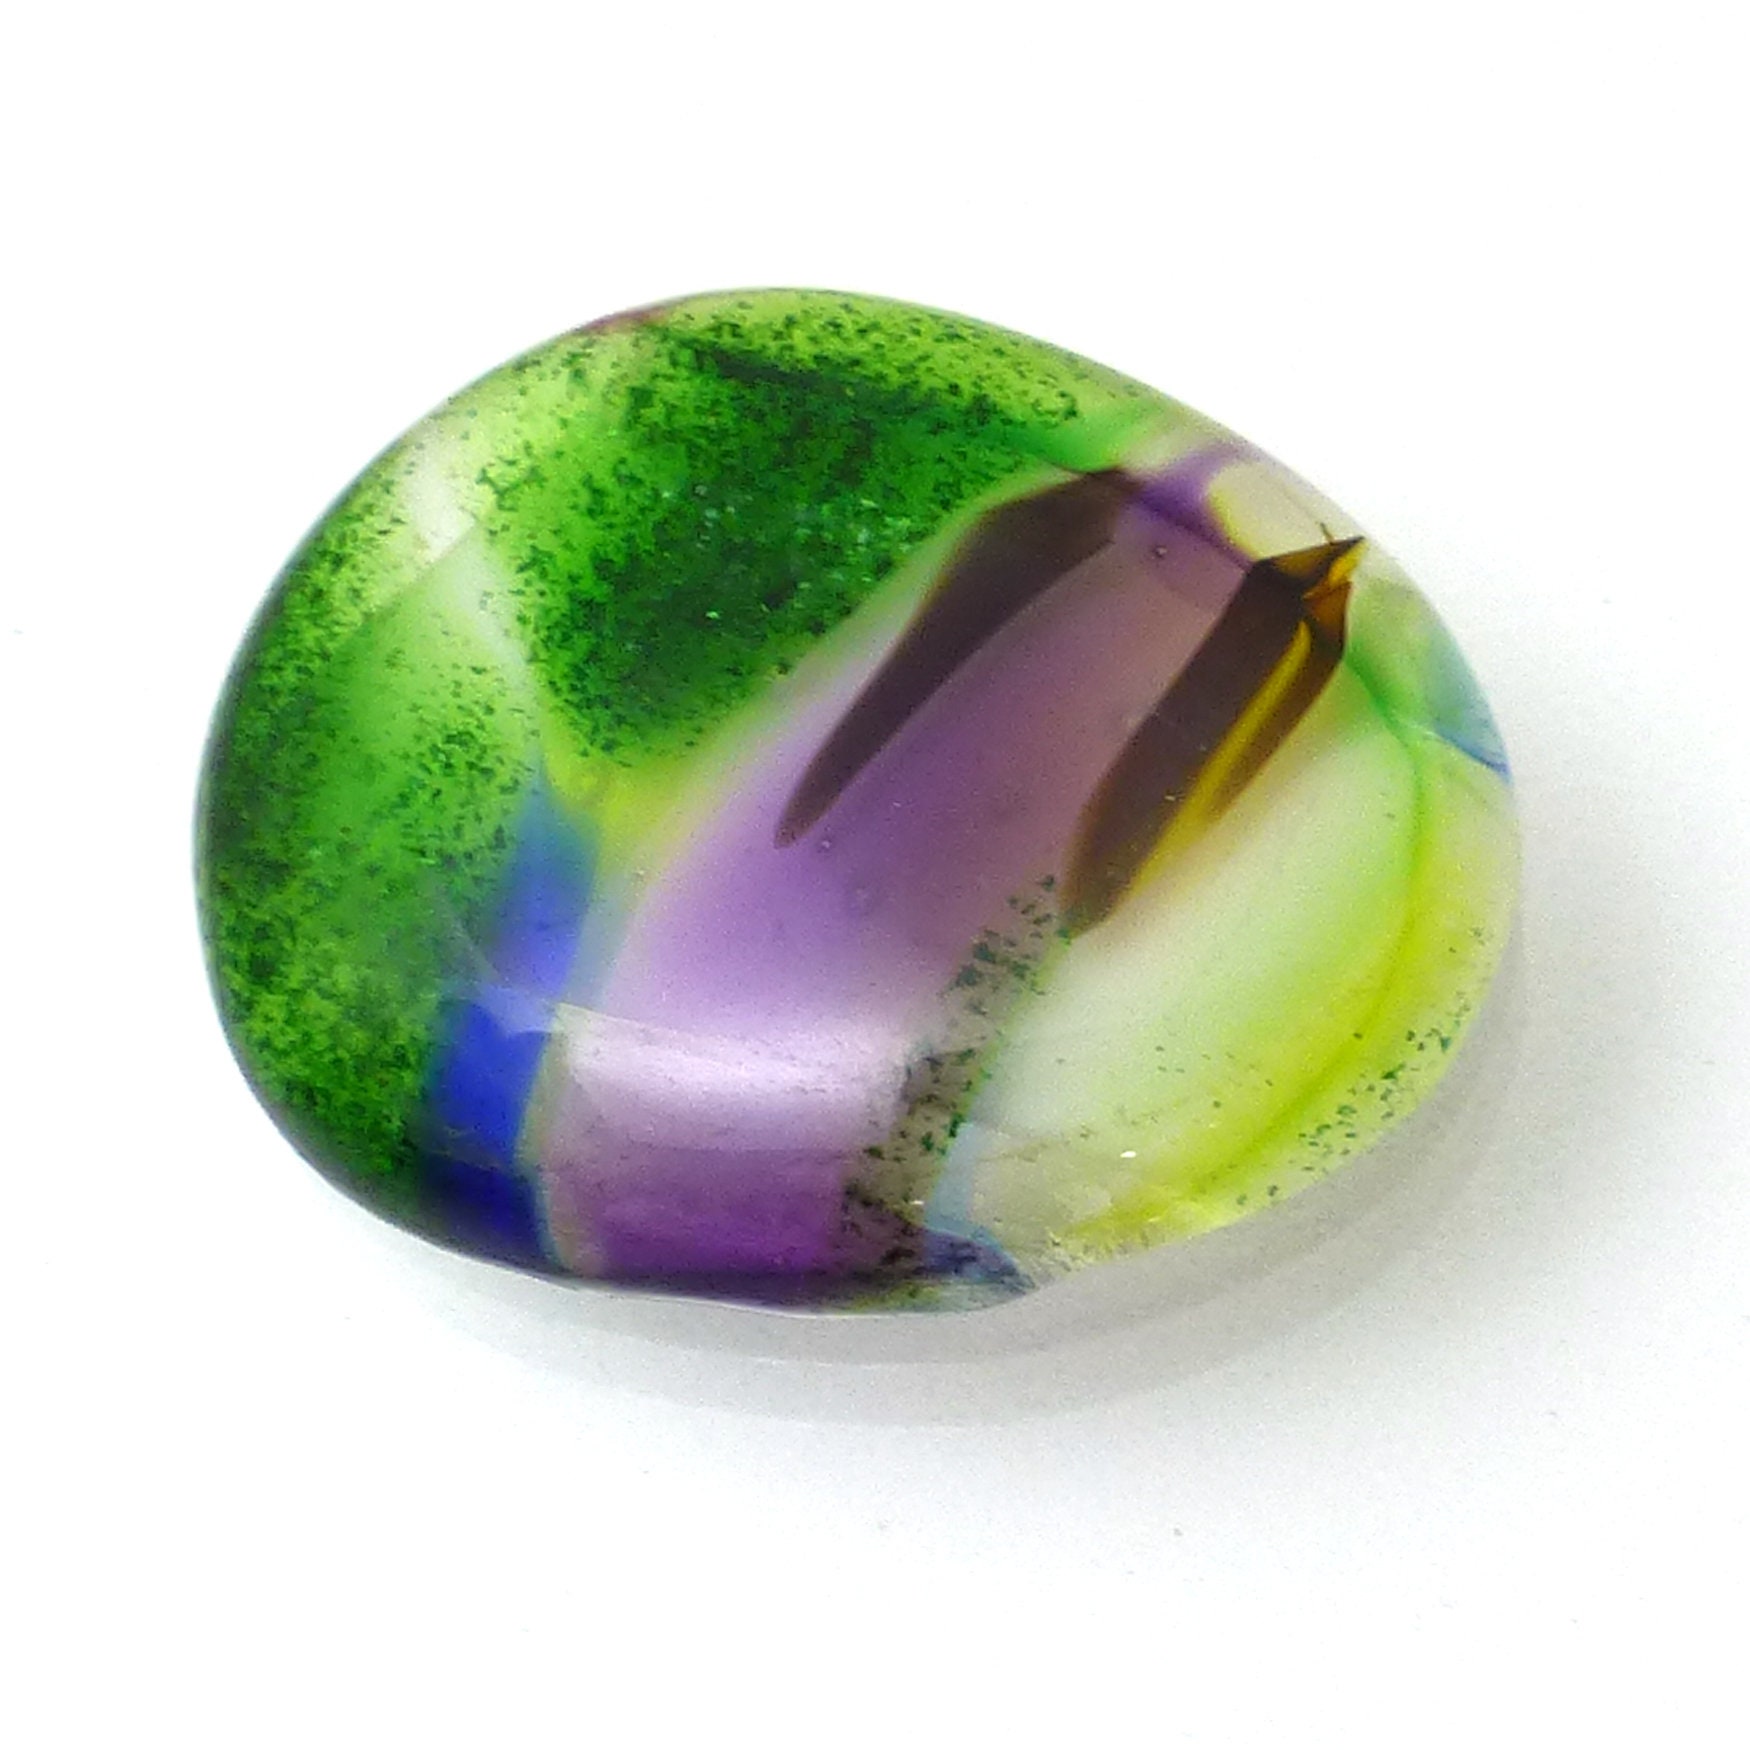 Dichroic Glass and One of a Kinds - Nixon Art Glass